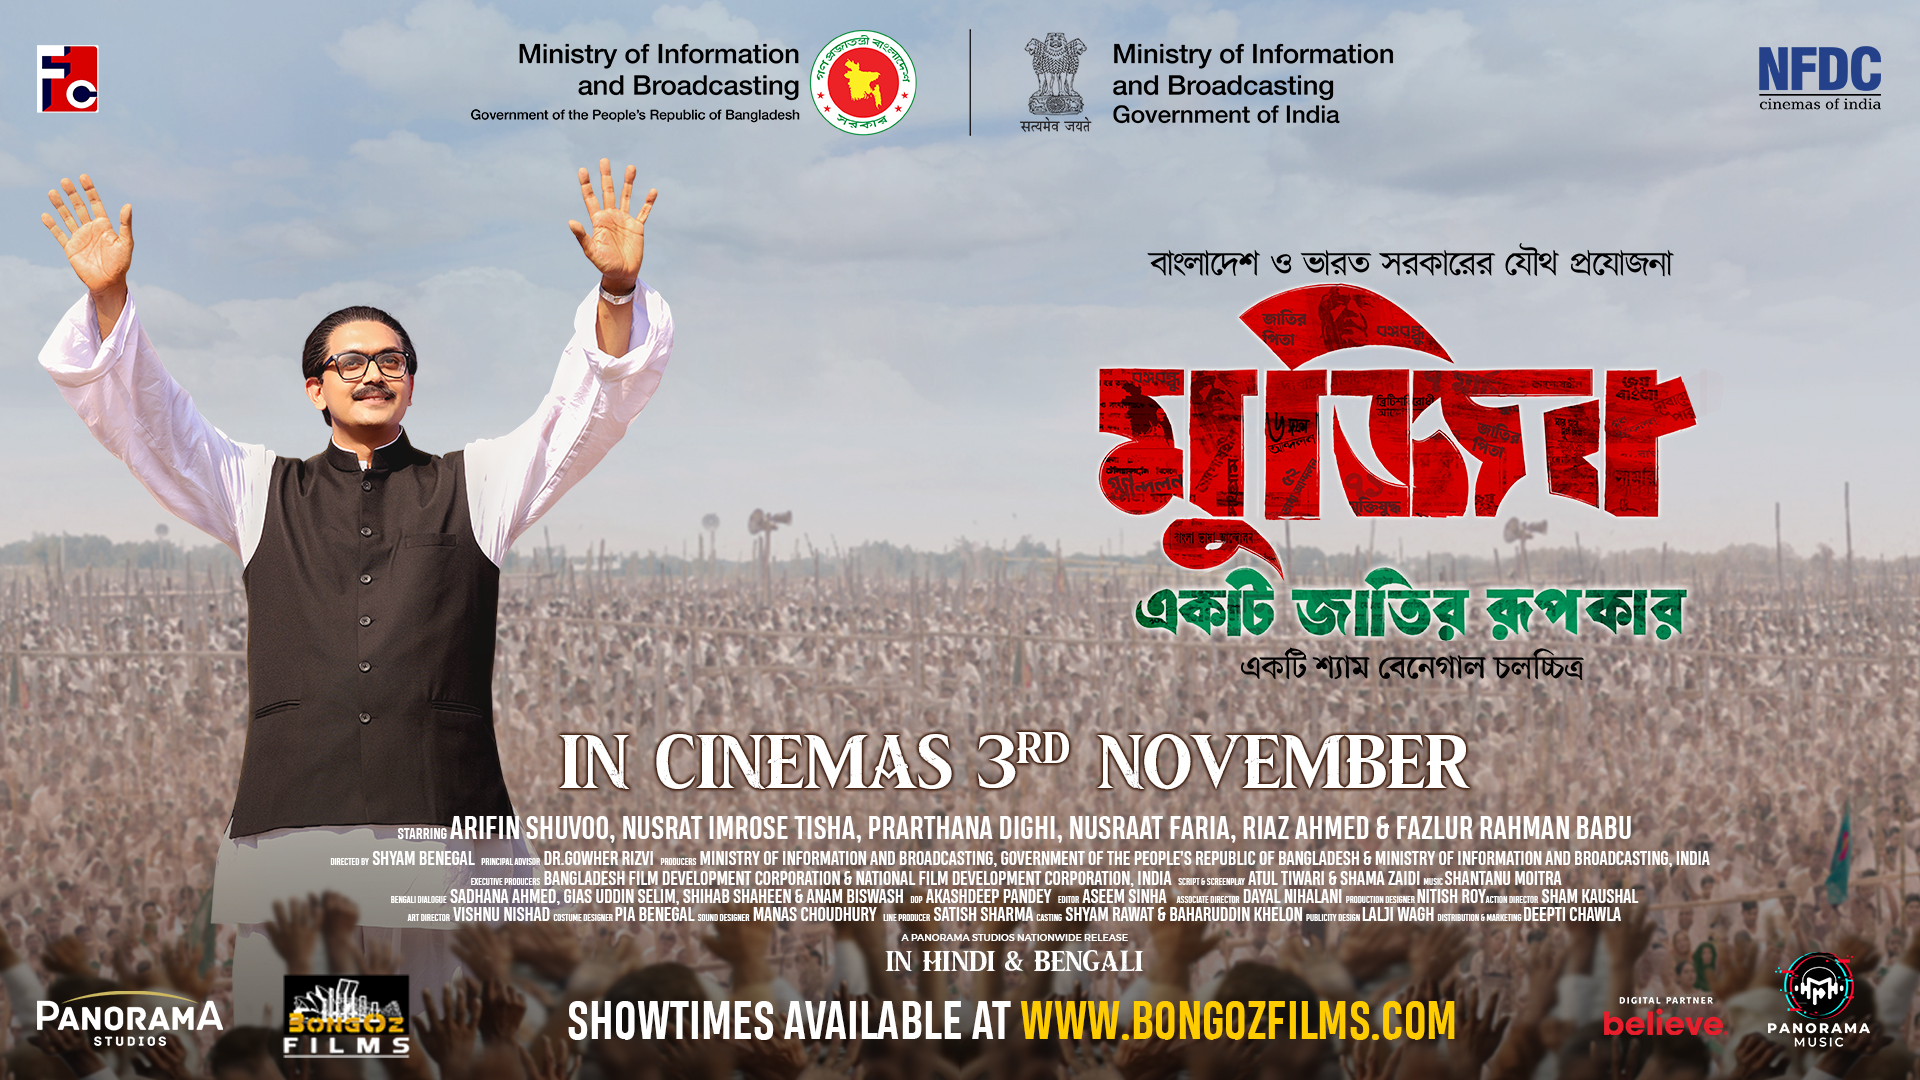 Mujib at HOYTS Belconnen 12th Nov Sunday 6 PM - 2nd show